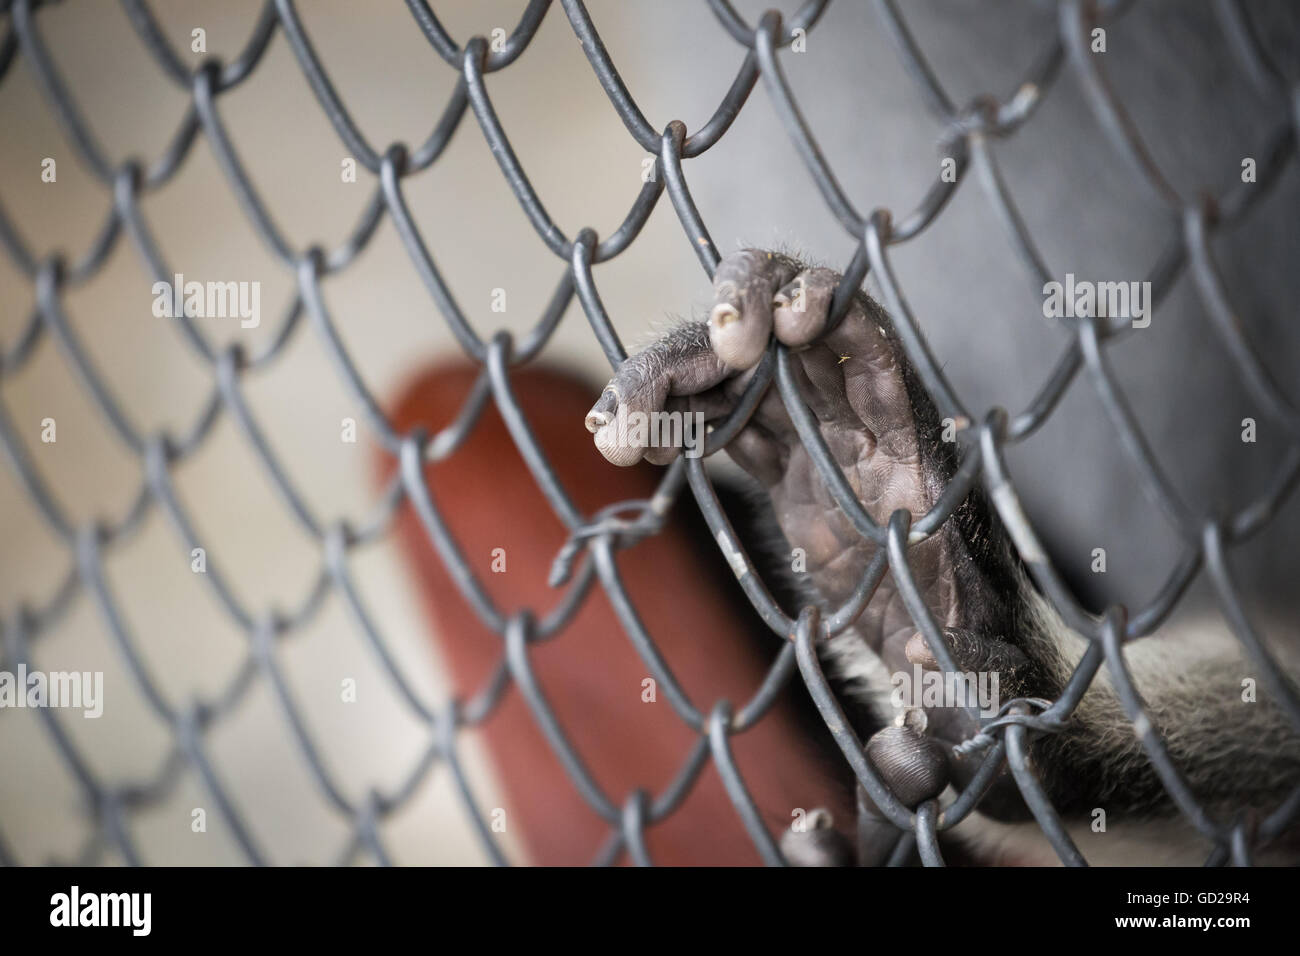 Abstract of imprison from close focus on monkey's hand touching iron cage Stock Photo